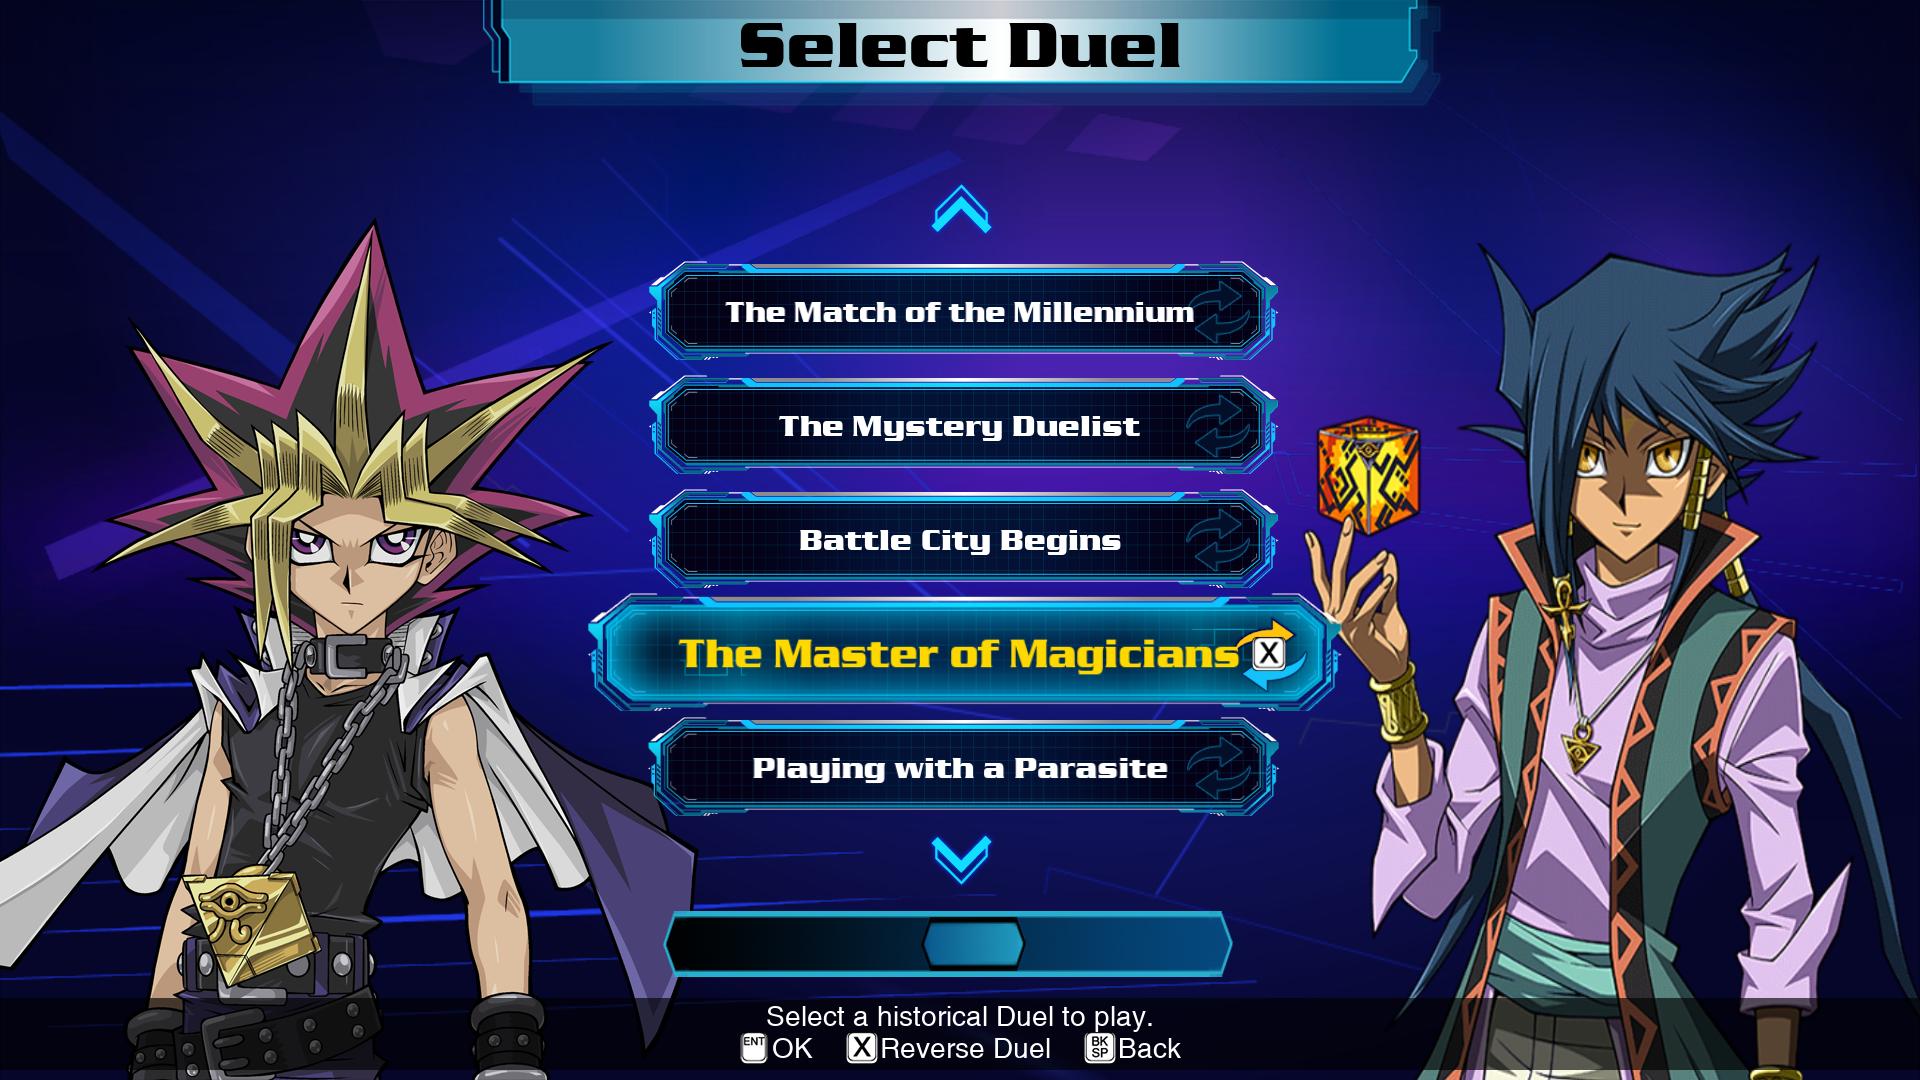 yugioh legacy of the duelist link evolution switch